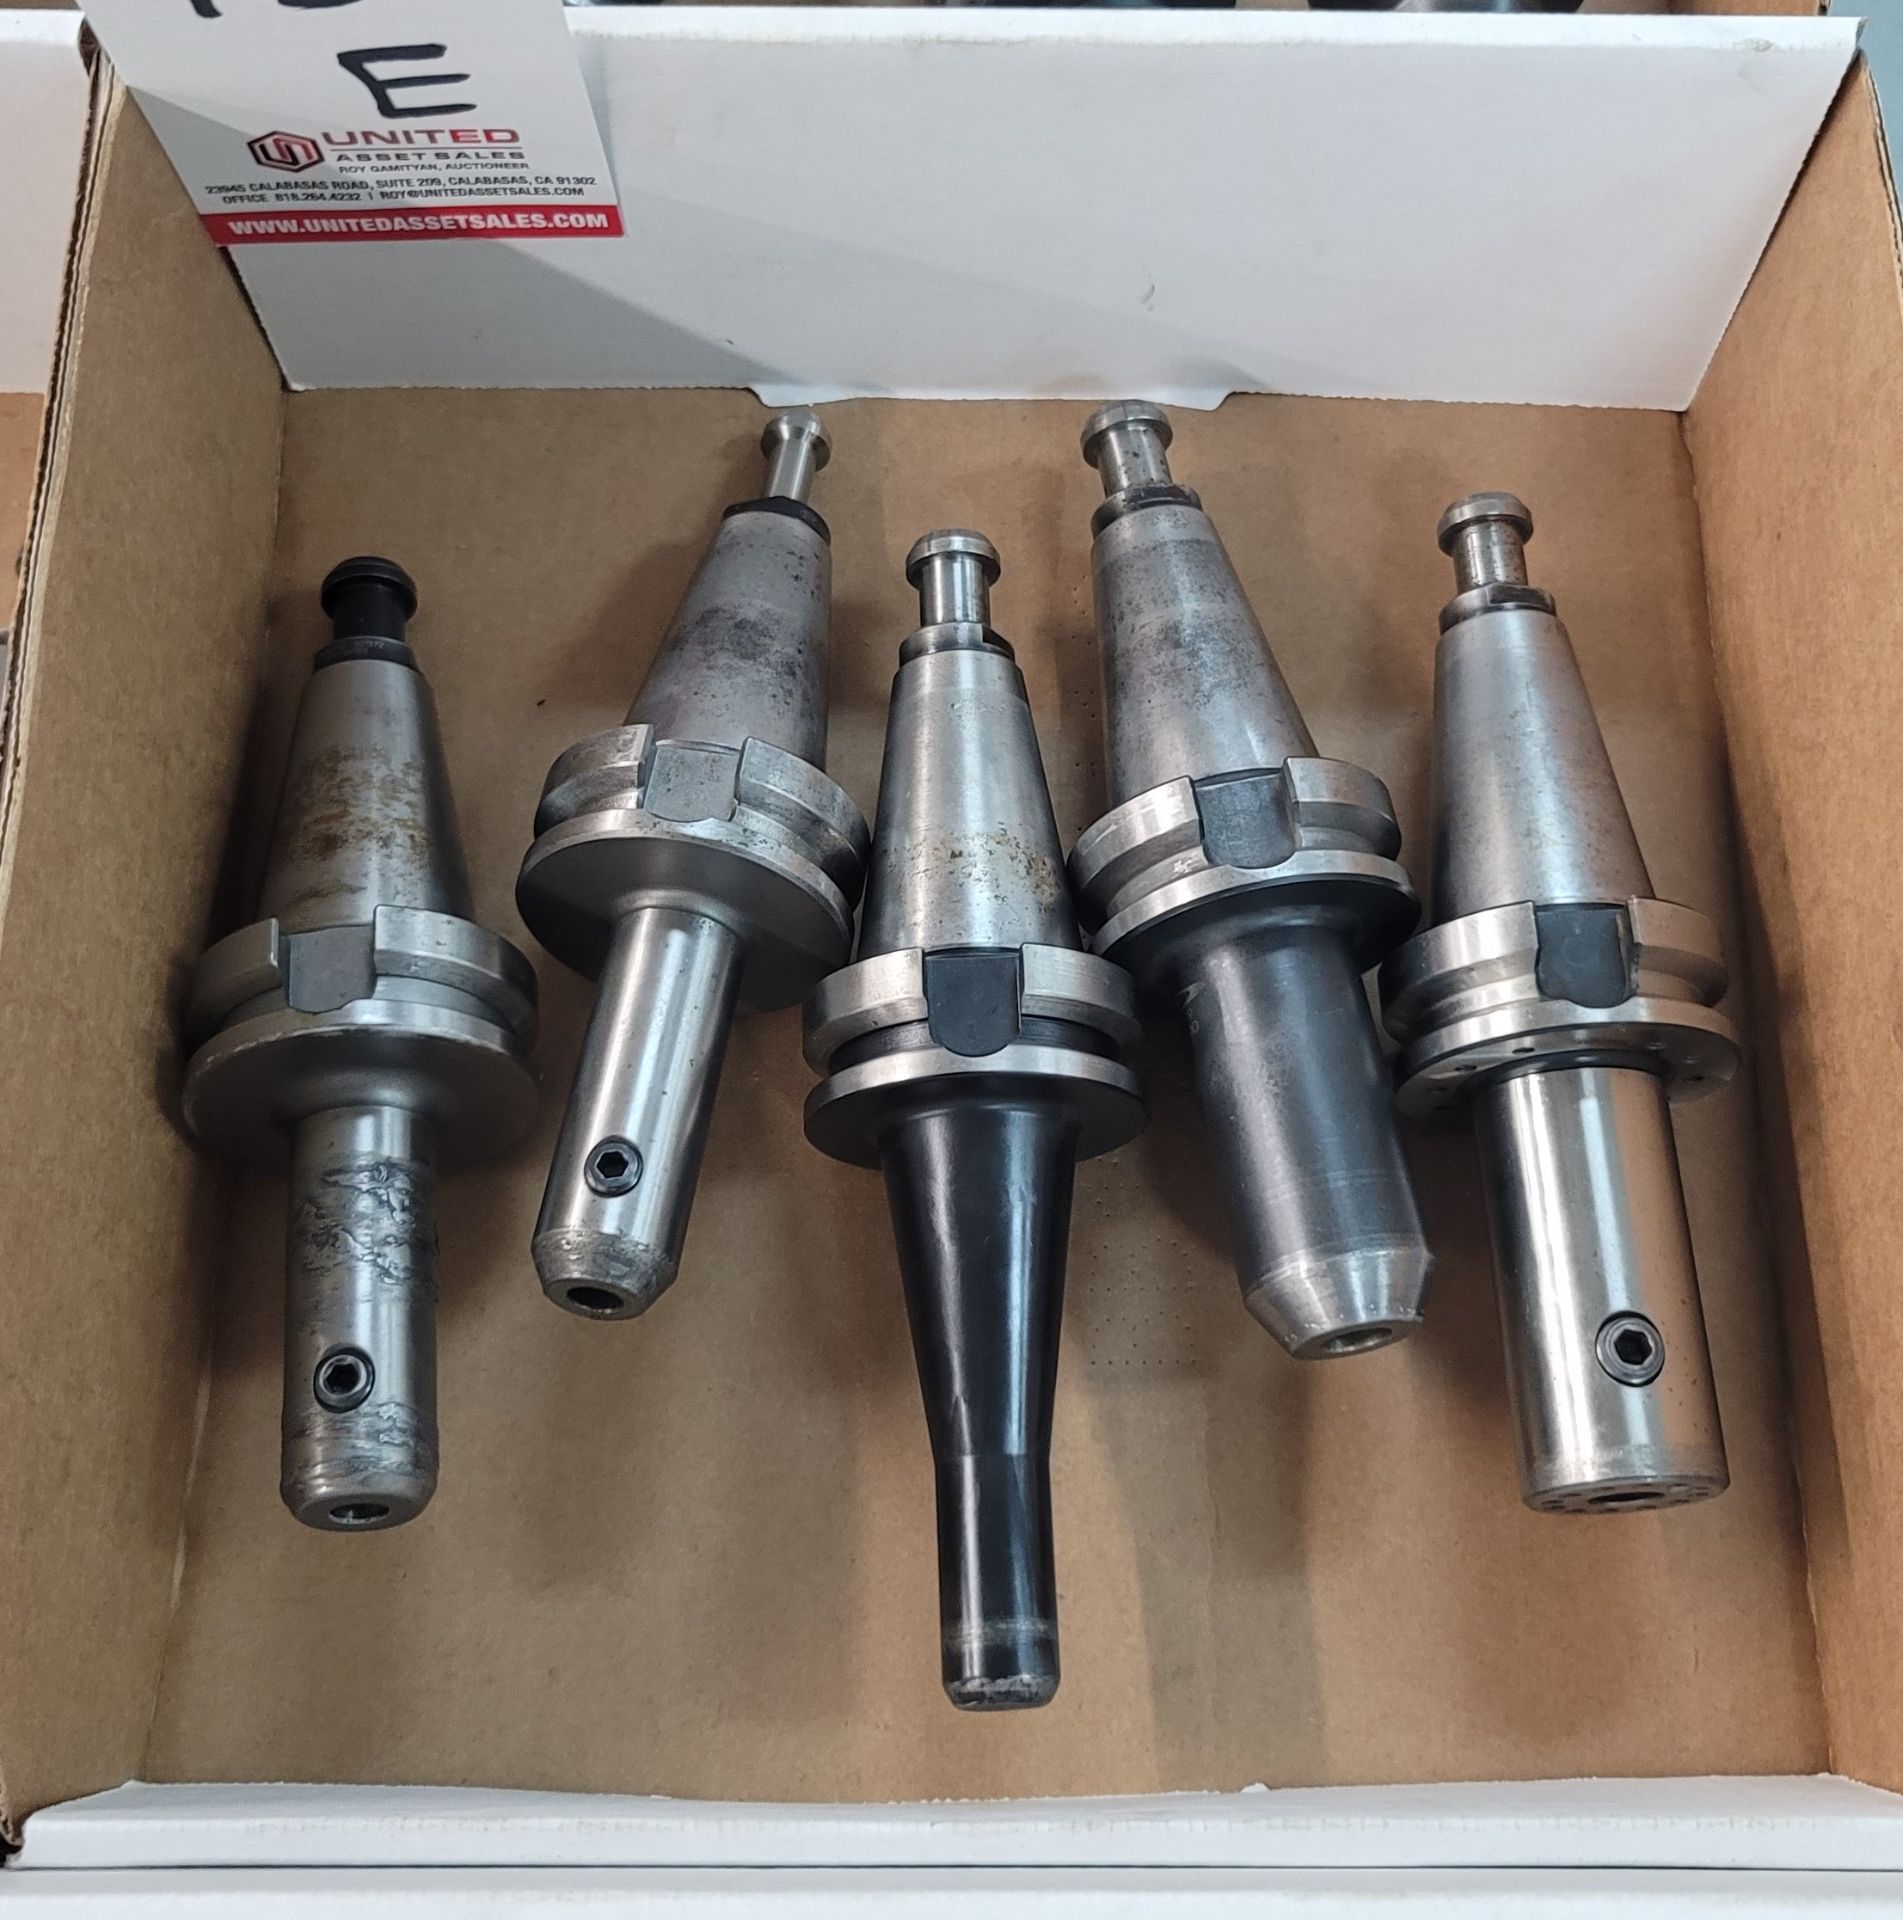 LOT - (5) BT-40 TOOL HOLDERS: (2) 1/8" SOLID, (2) 1/2" SOLID AND (1) 3/16", **IMMEX REGISTERED